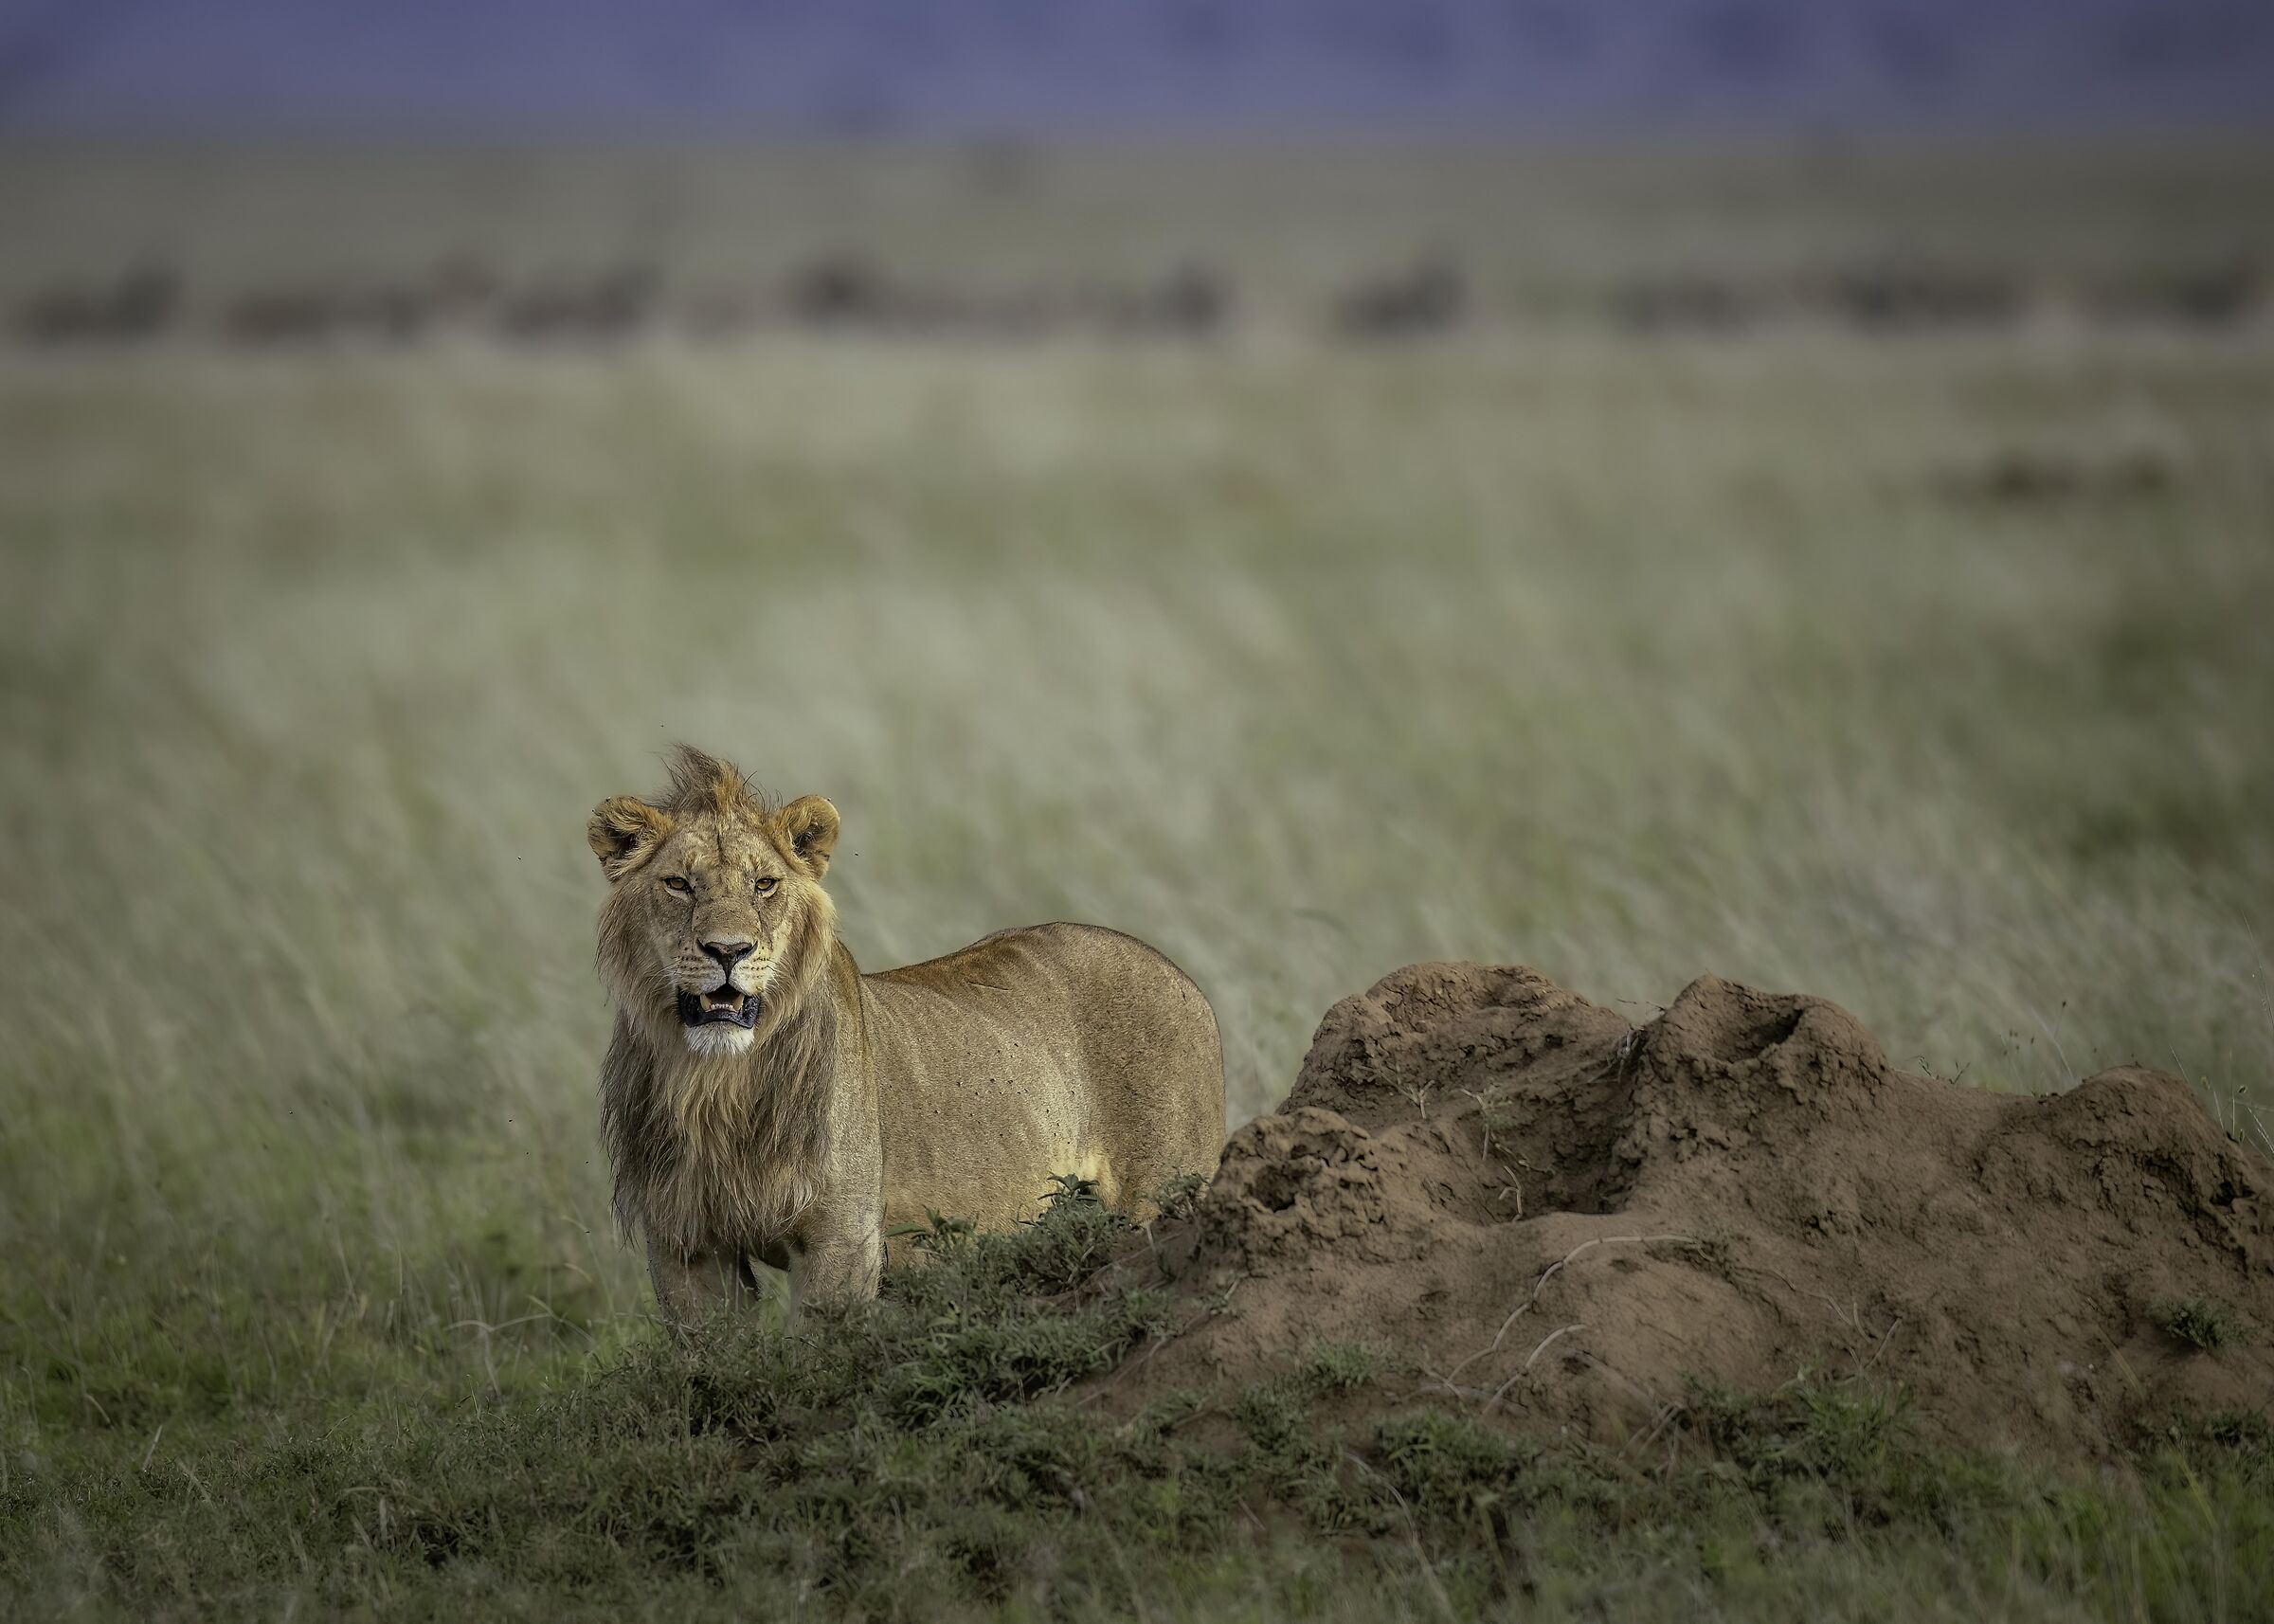 The King and the Serengeti...